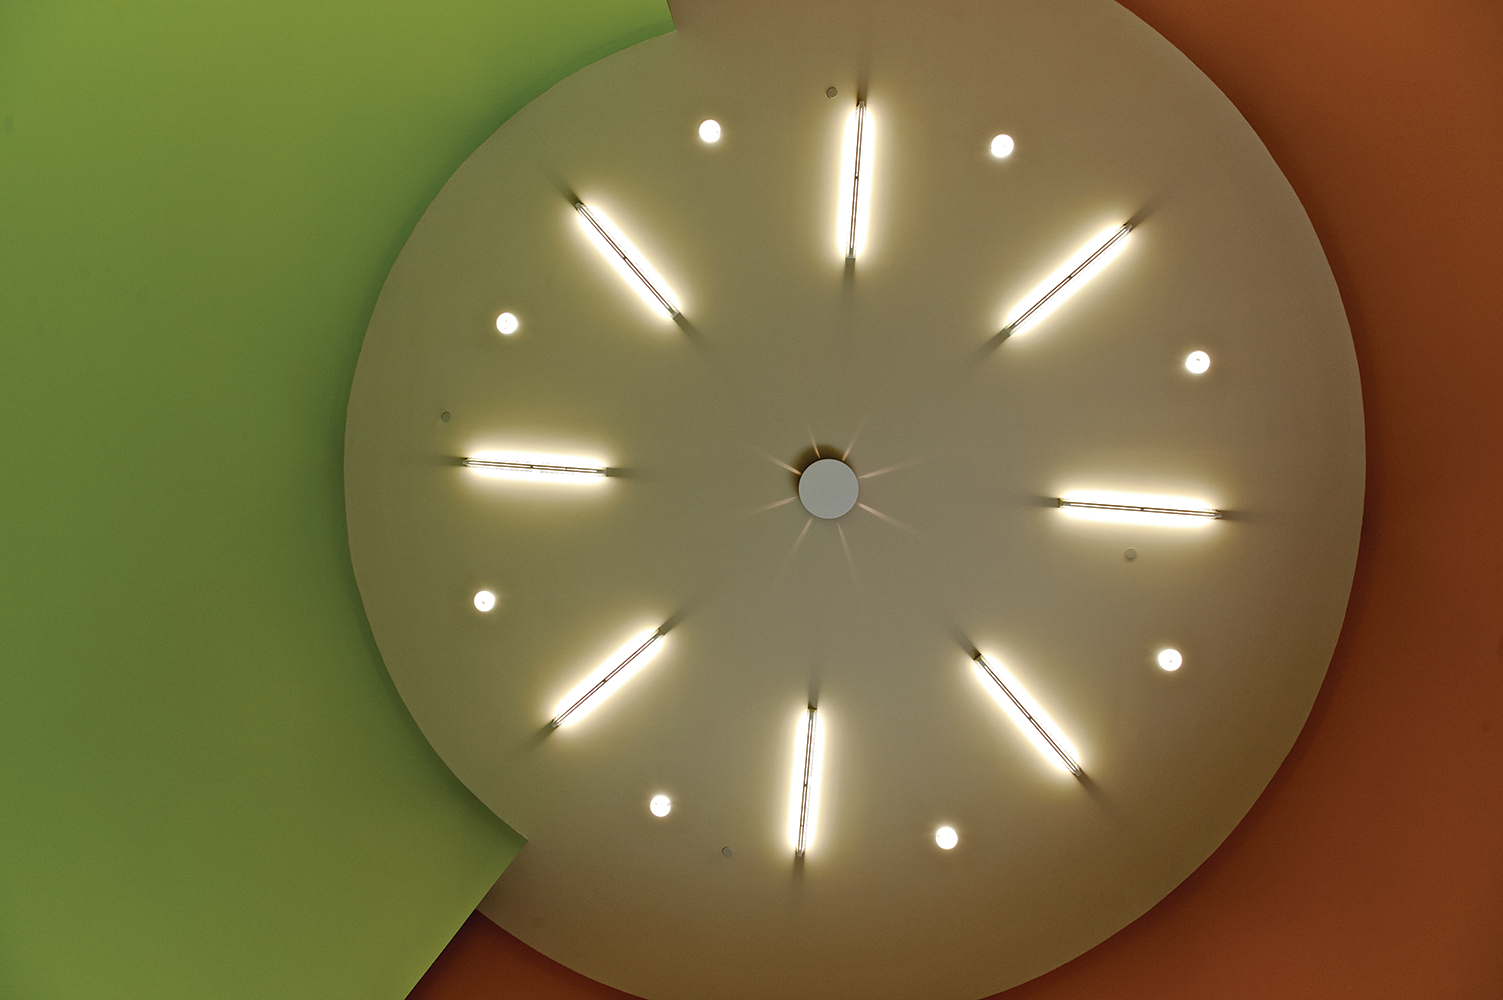 Ether ceiling mounted luminaires in a circular design for an education lighting application